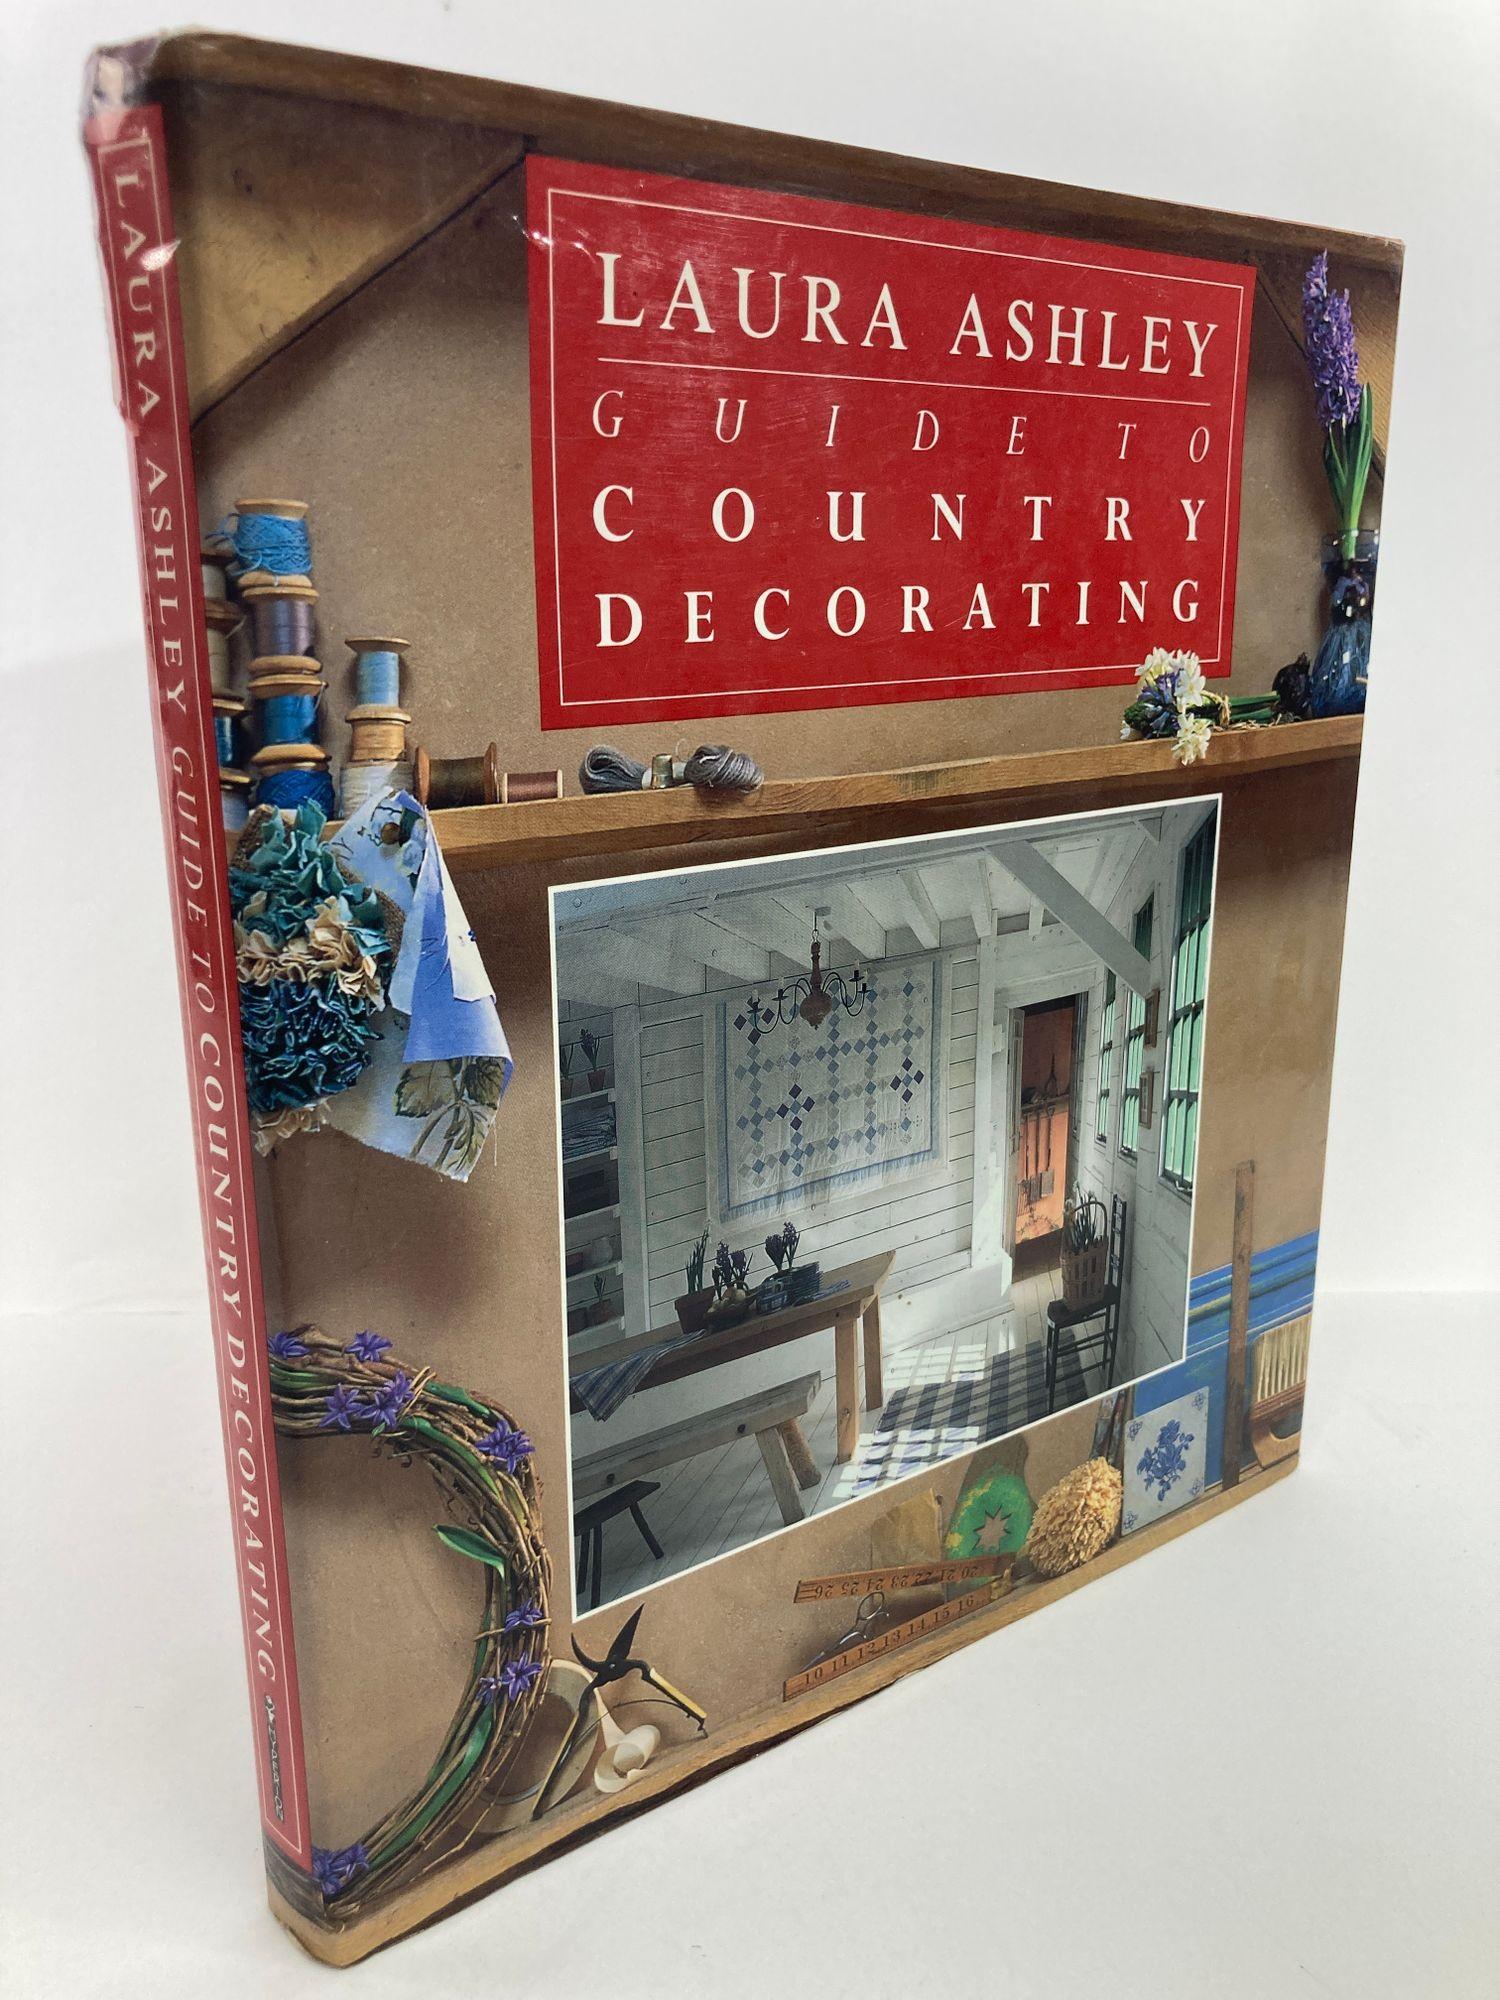 Laura Ashley guide to country decorating. Hardcover book.
The timeless appeal of rustic living, with its emphasis on comfort, function, and simplicity, gets a crisp, contemporary interpretation--in classic Laura Ashley style--now available in trade